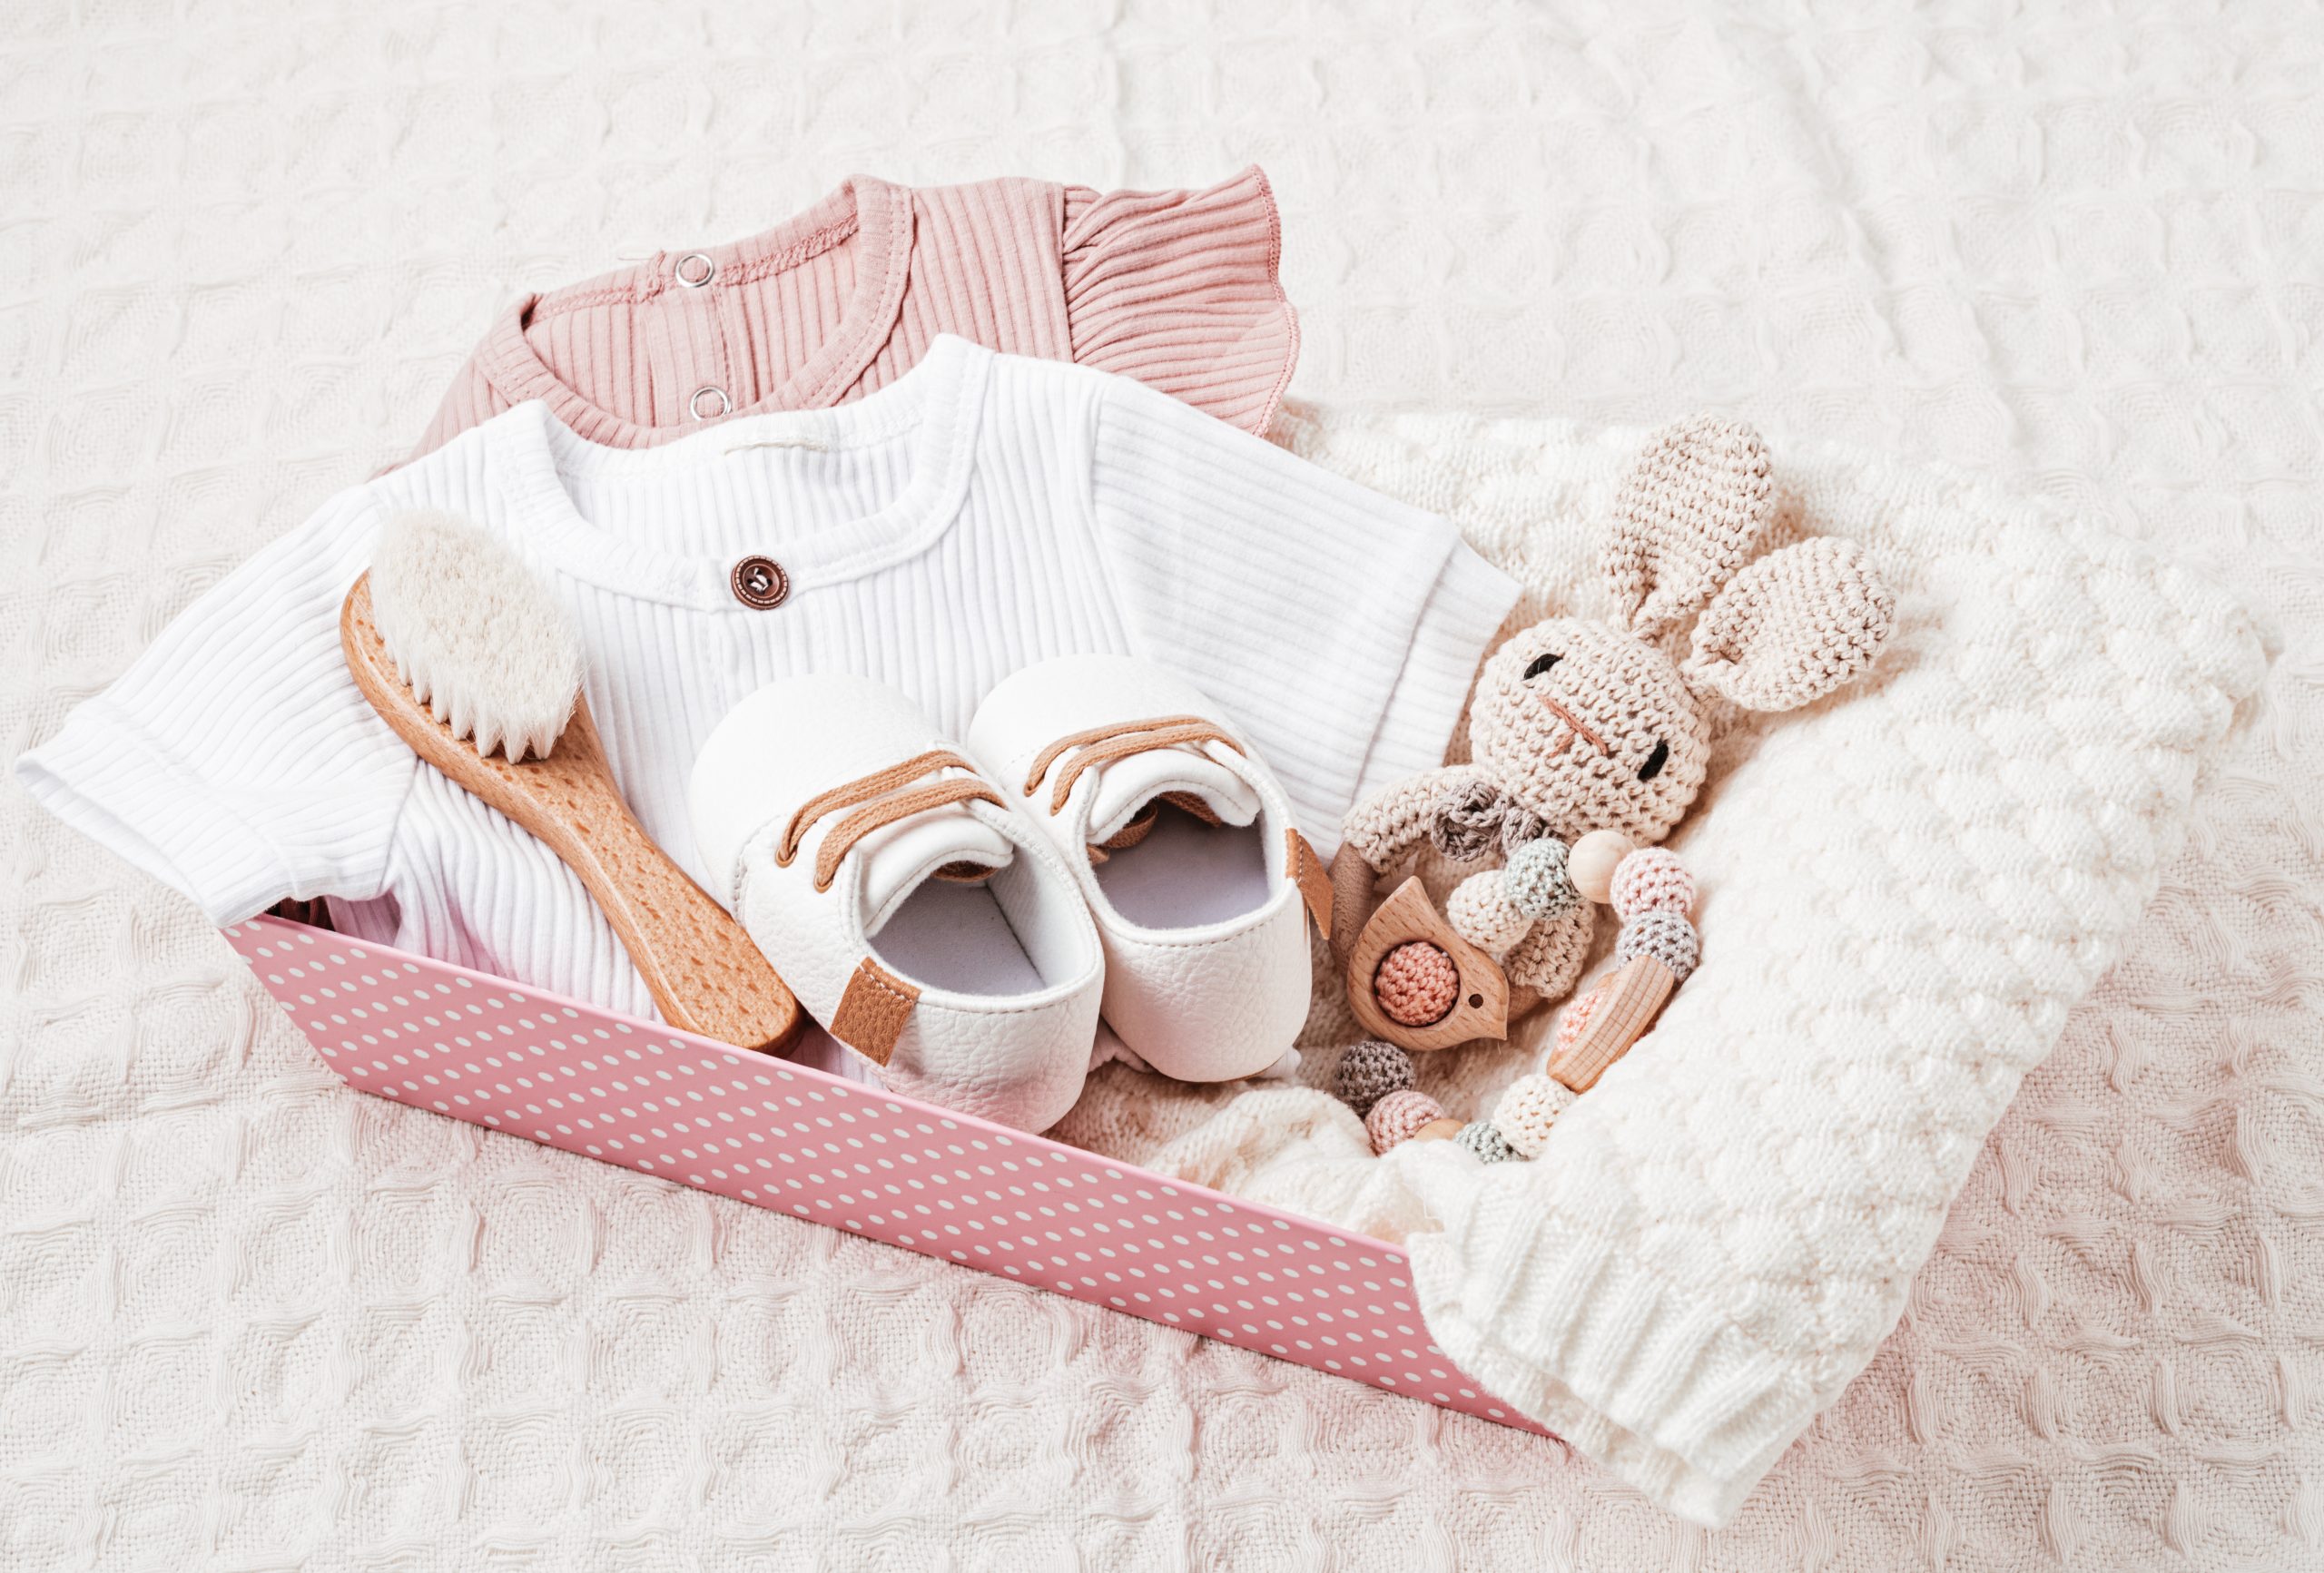 The Best Gifts For Baby – Newborns and 6-Month Olds